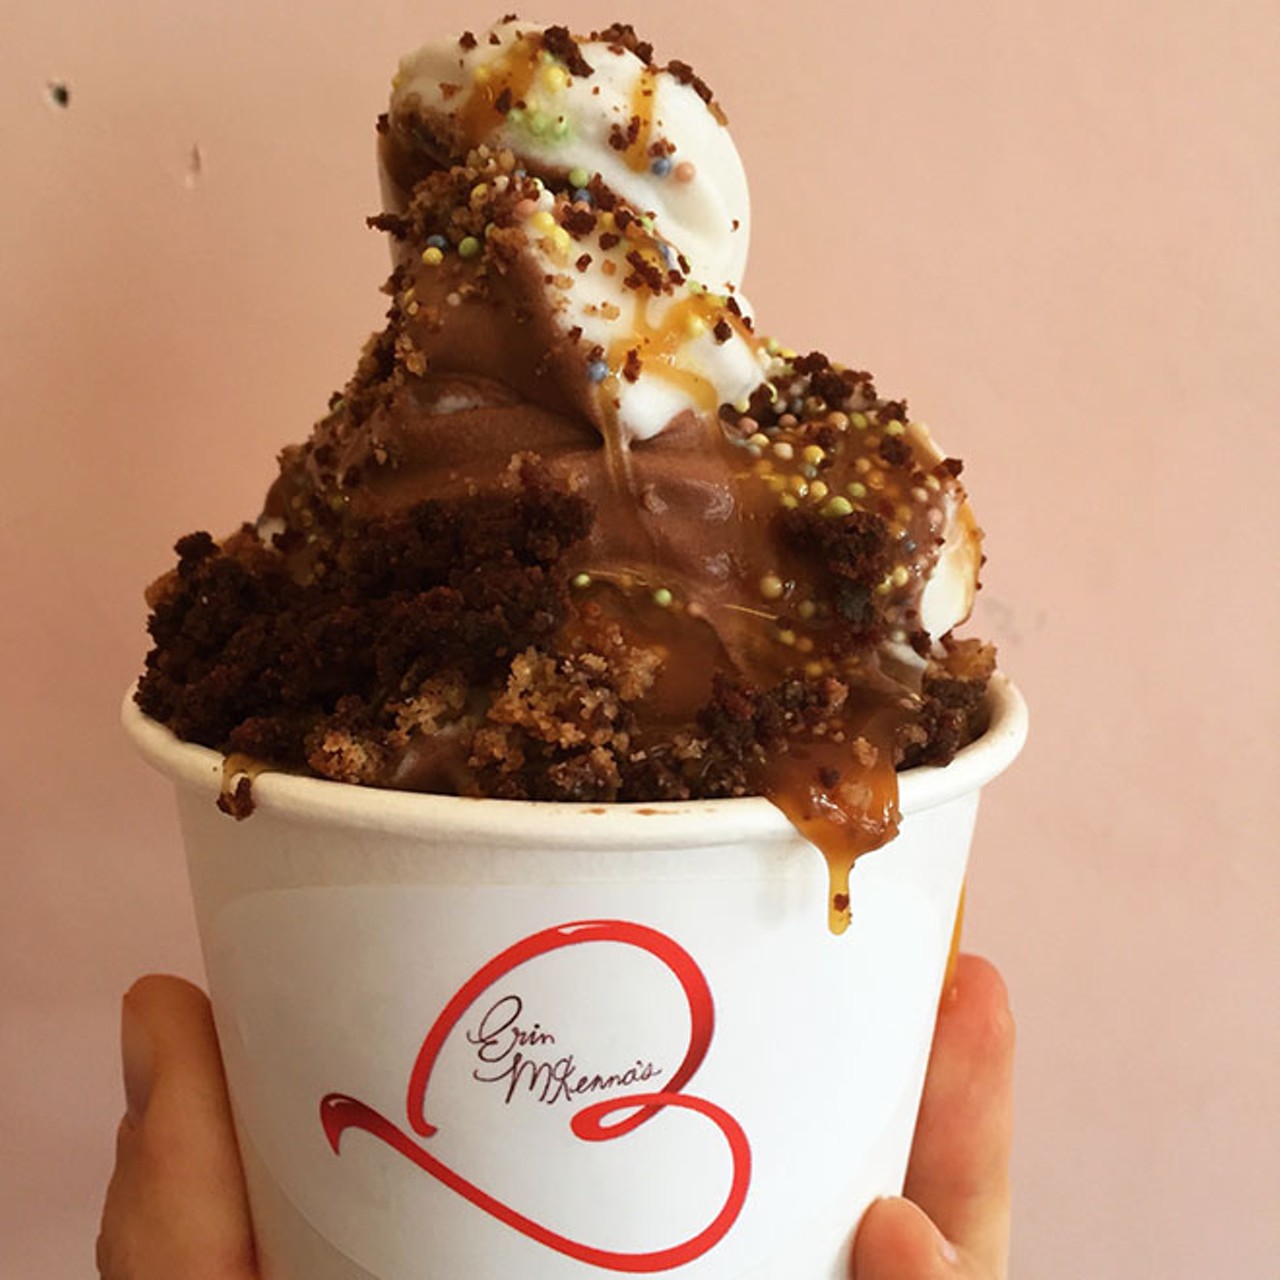 Big Fun Frosty at Erin McKenna's Bakery
1642 E. Buena Vista, 855-462.2292, erinmckennasbakery.com
The BFF is a chocolate-and-vanilla swirl of vegan soft-serve ice cream topped with cookie crumbles, brownie bits, donut crumbs, caramel, chocolate sauce and strawberry sauce &#133; I MEAN.
Photo via erinmckennasbakery.tumblr.com